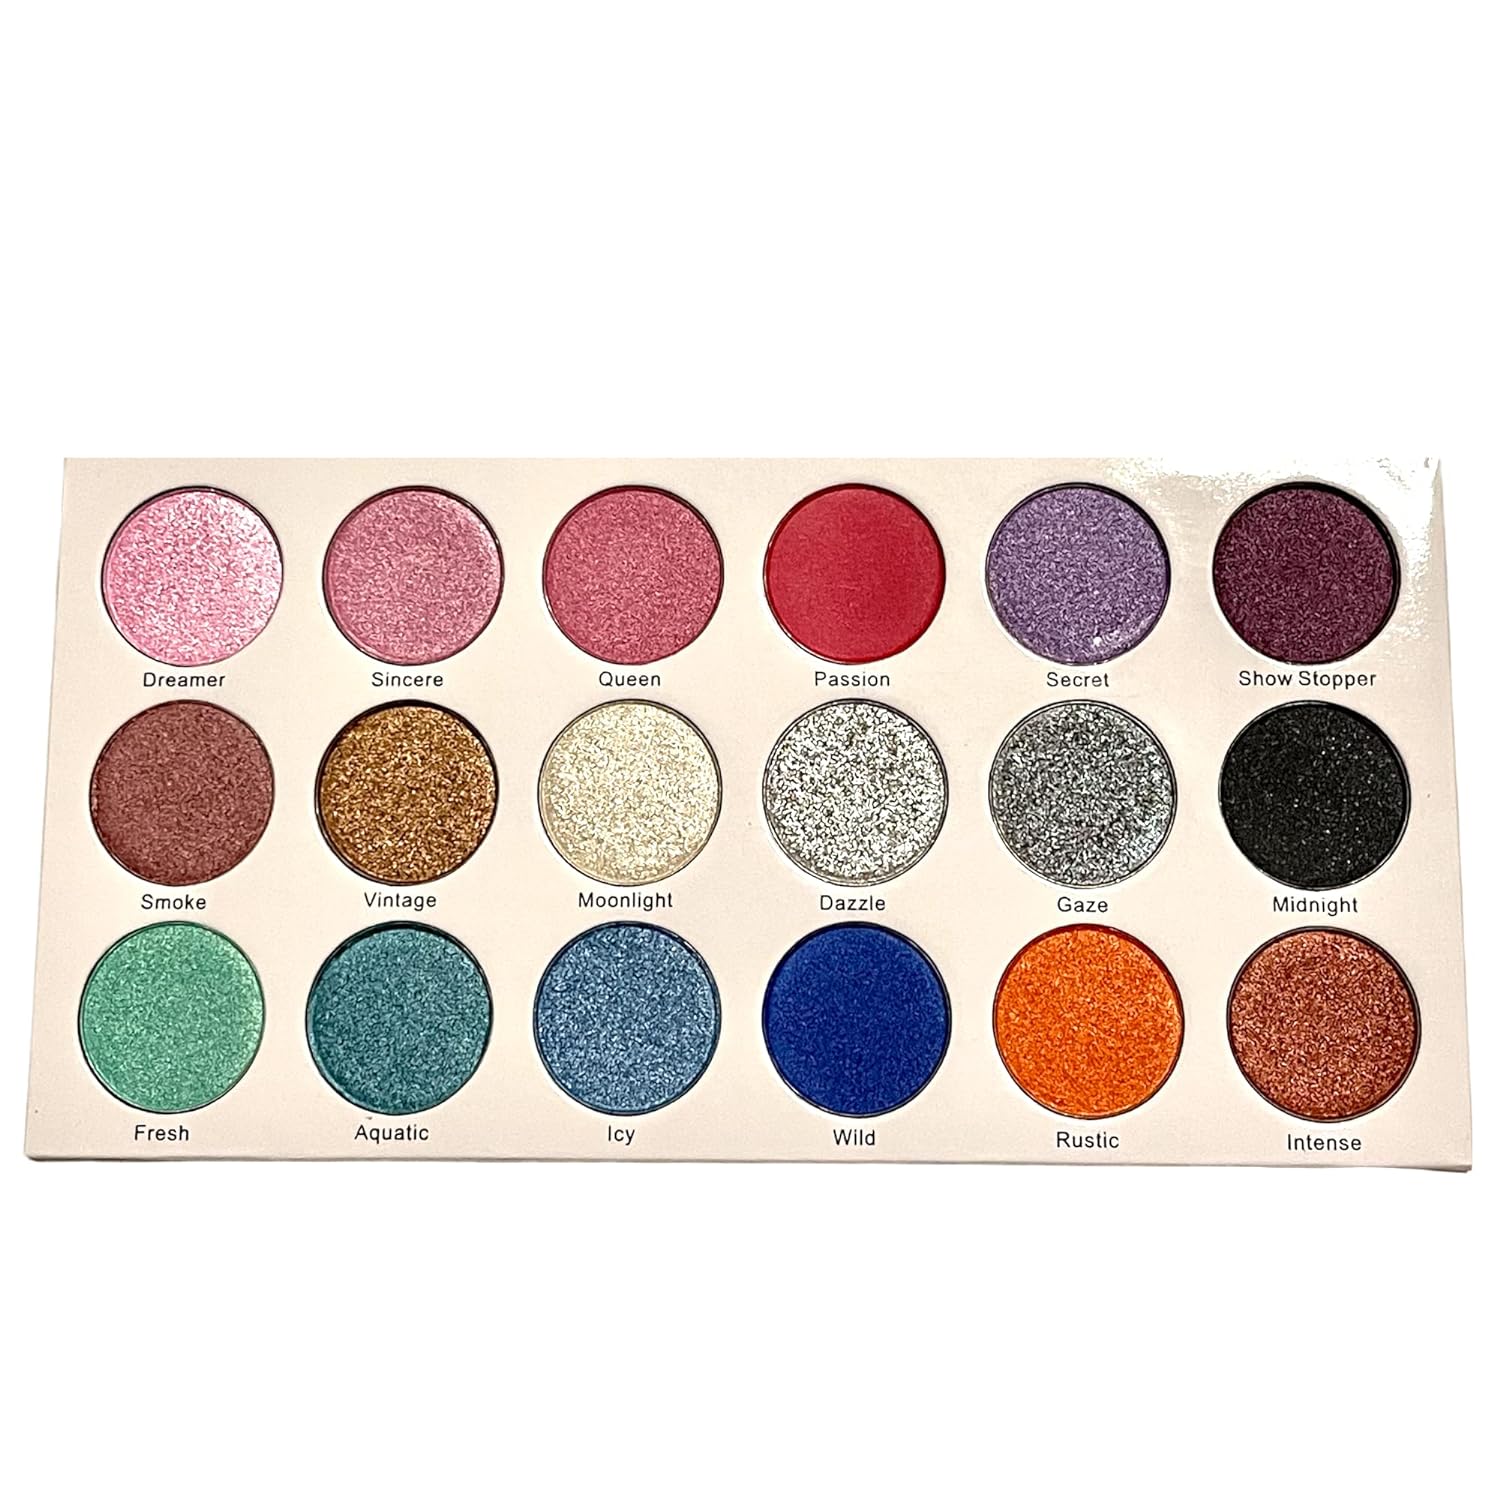 Beauty by Mishaal Pigmented Shimmery Bedazzle Eyeshadow Palette, Vegan, Cruelty-Free, No Fall Out, 6.80  (Pack of 1), 6.8